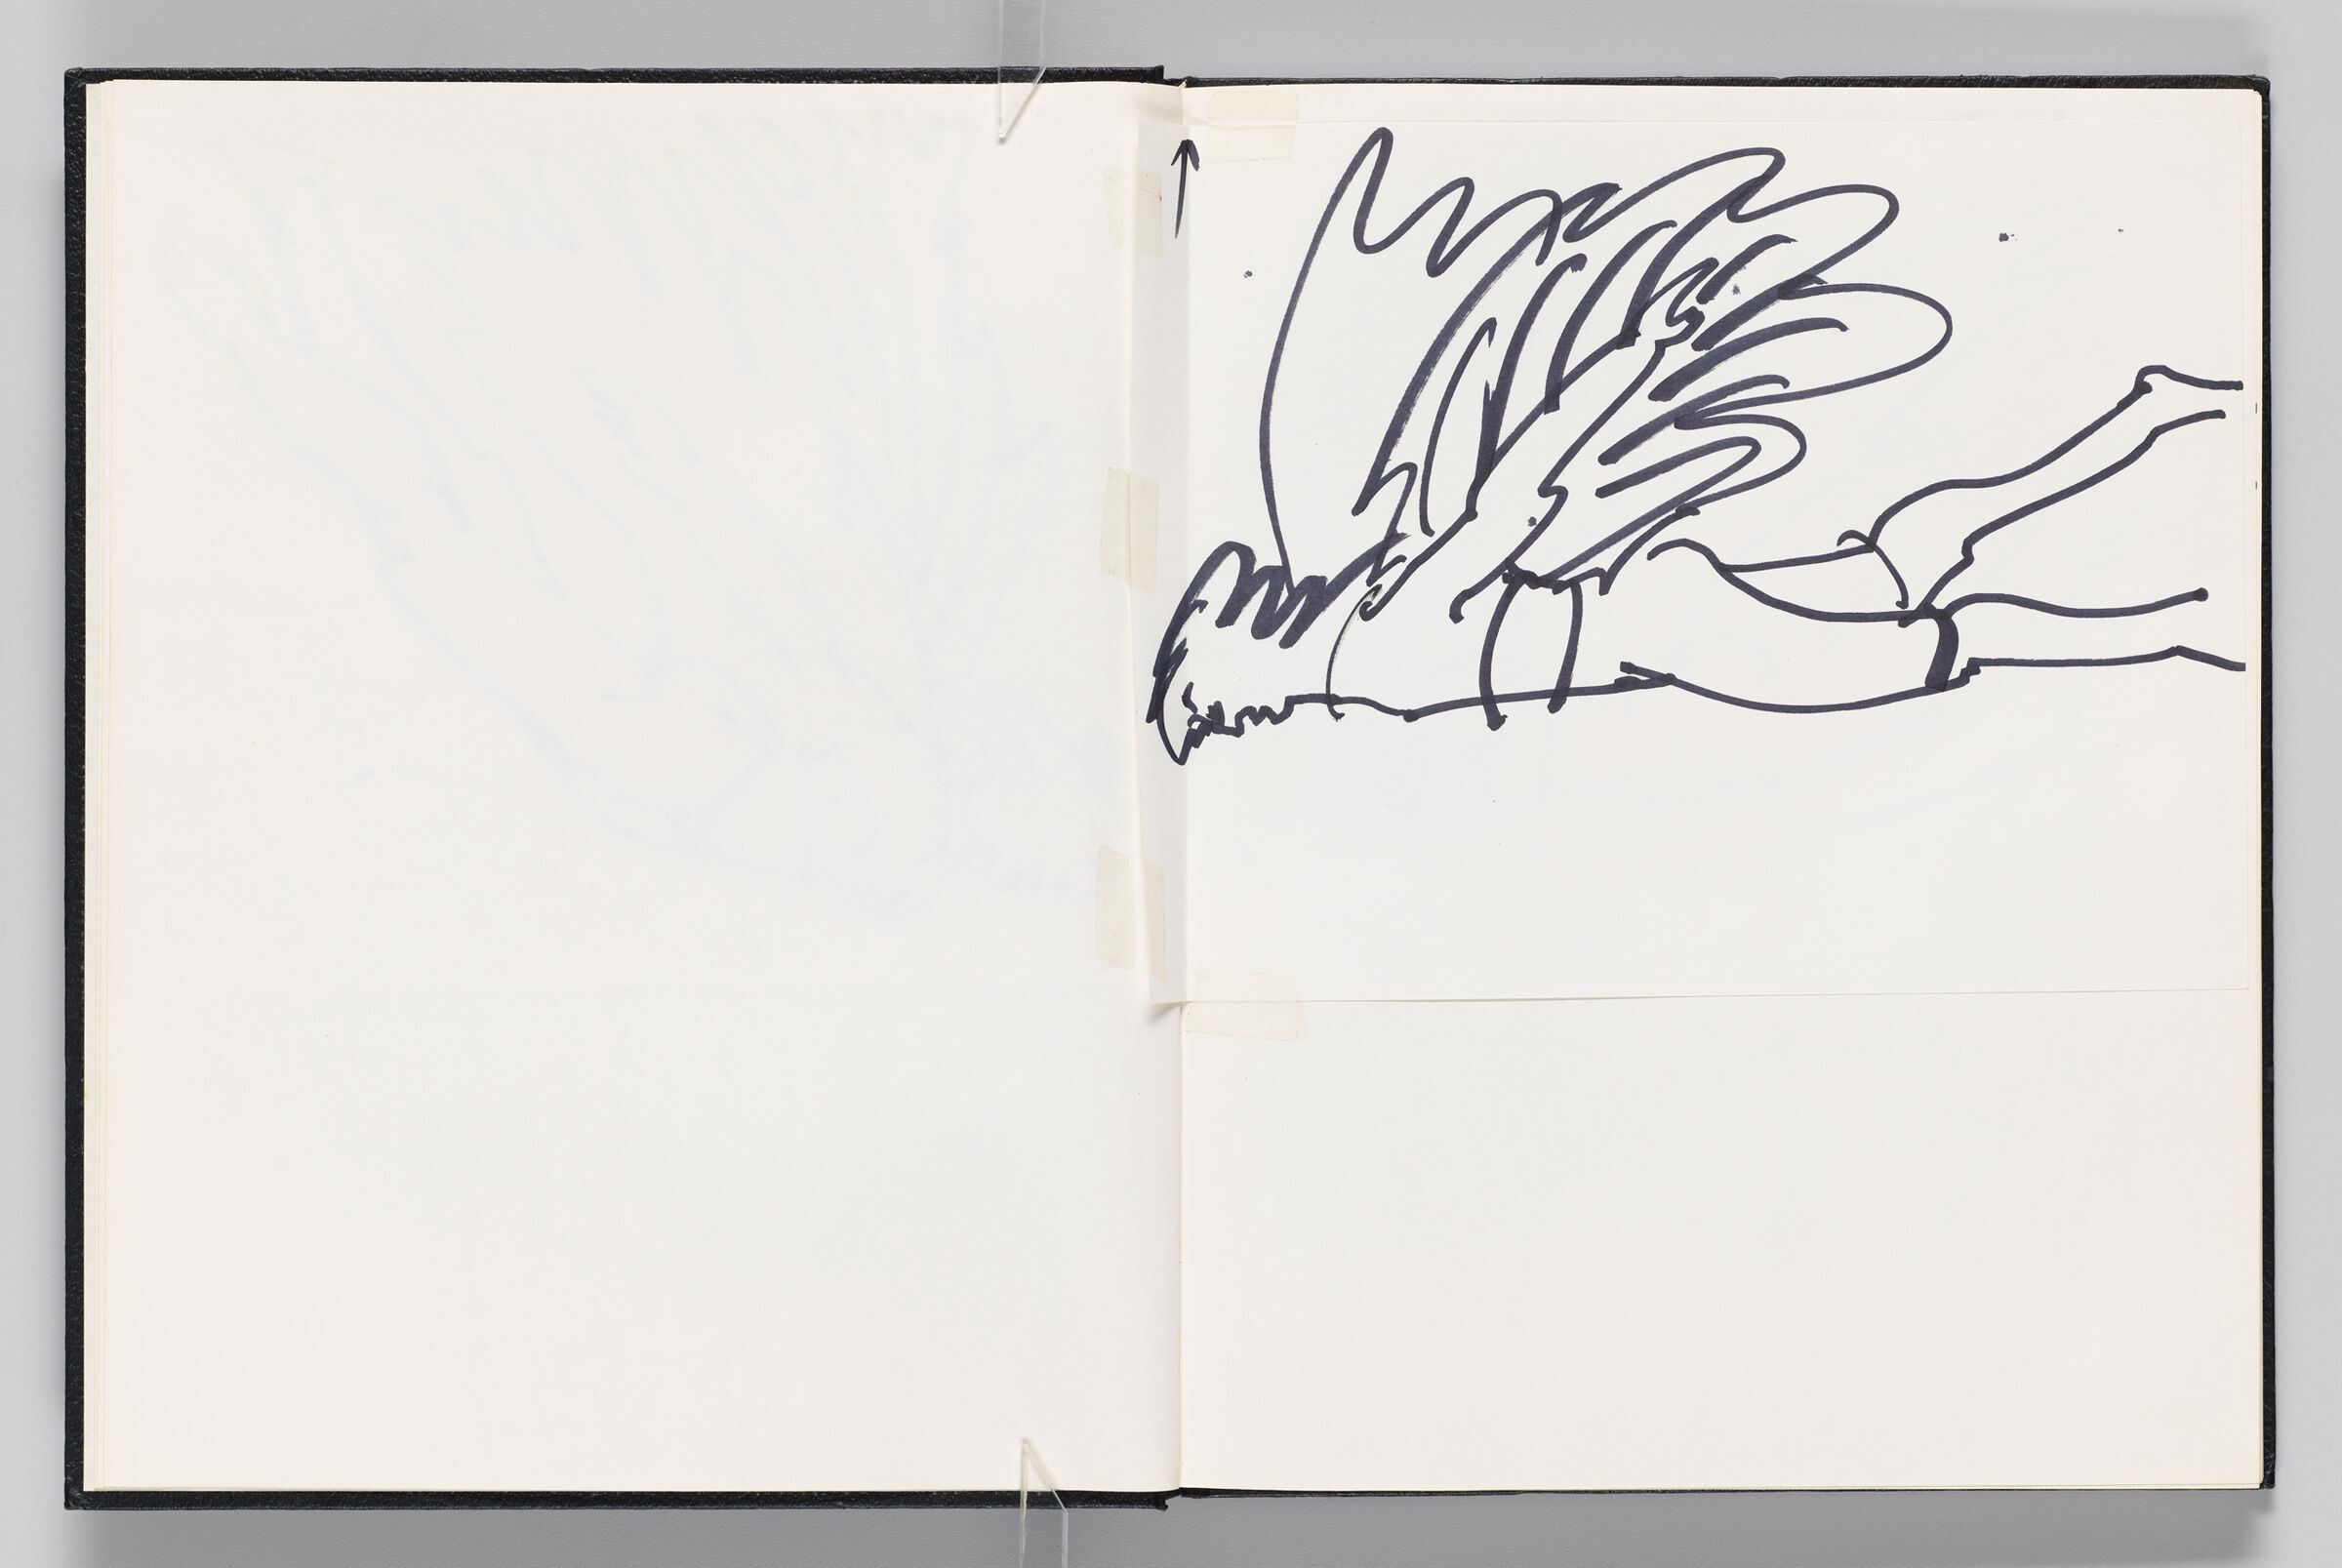 Untitled (Adhered Icarus Sketch, Two-Page Spread)